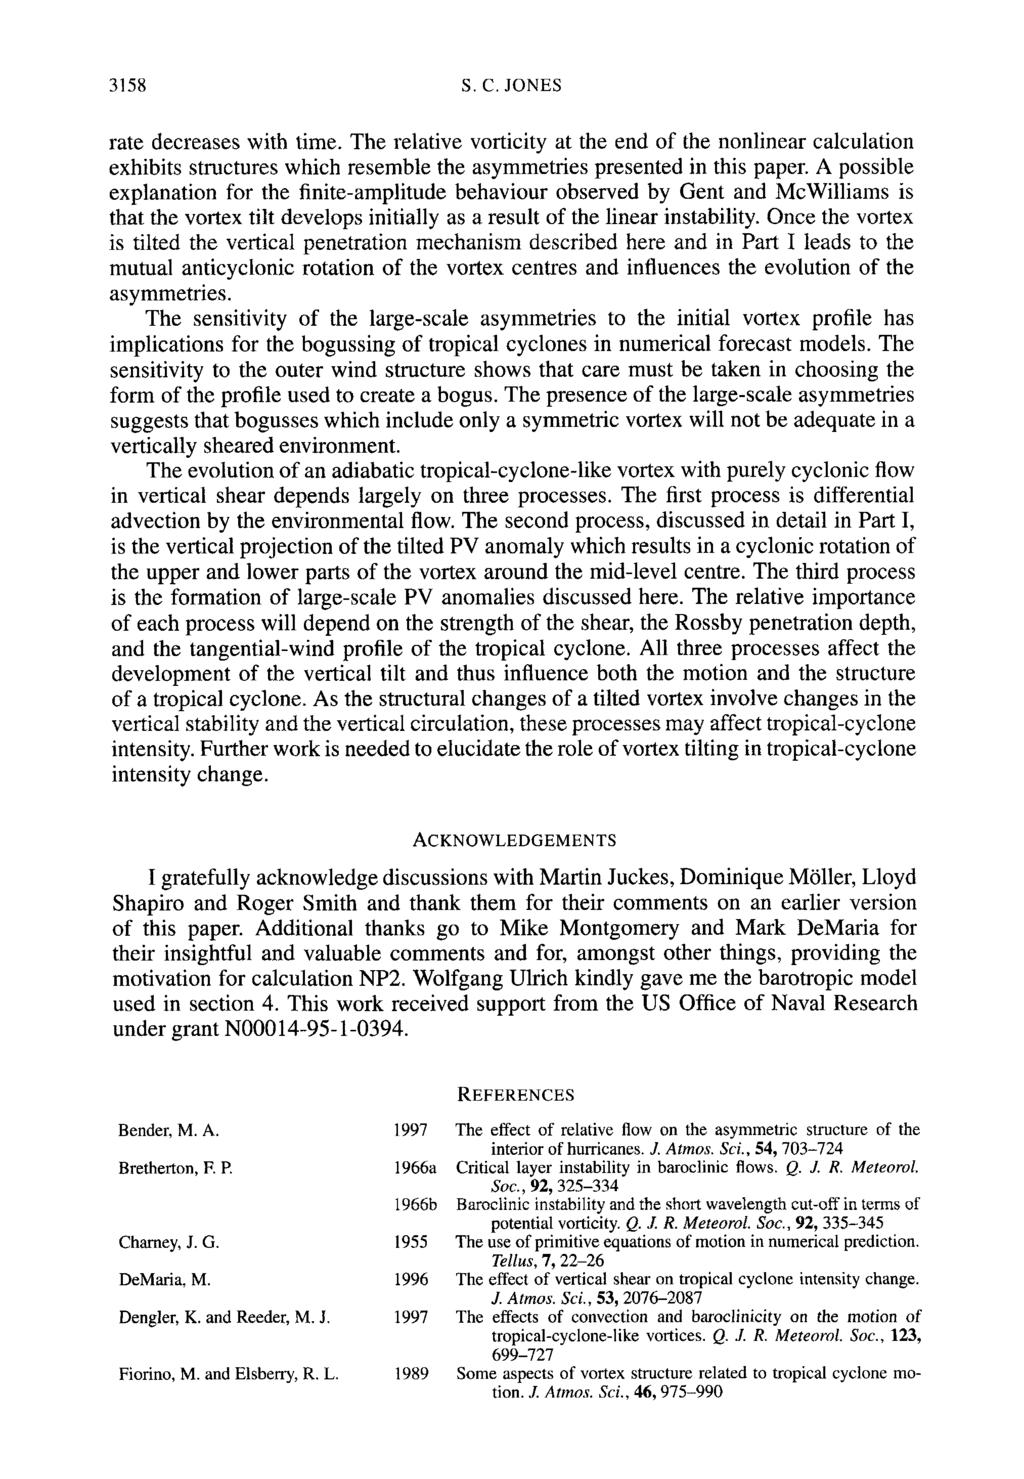 3158 S. C. JONES rate decreases with time. The relative vorticity at the end of the nonlinear calculation exhibits structures which resemble the asymmetries presented in this paper.